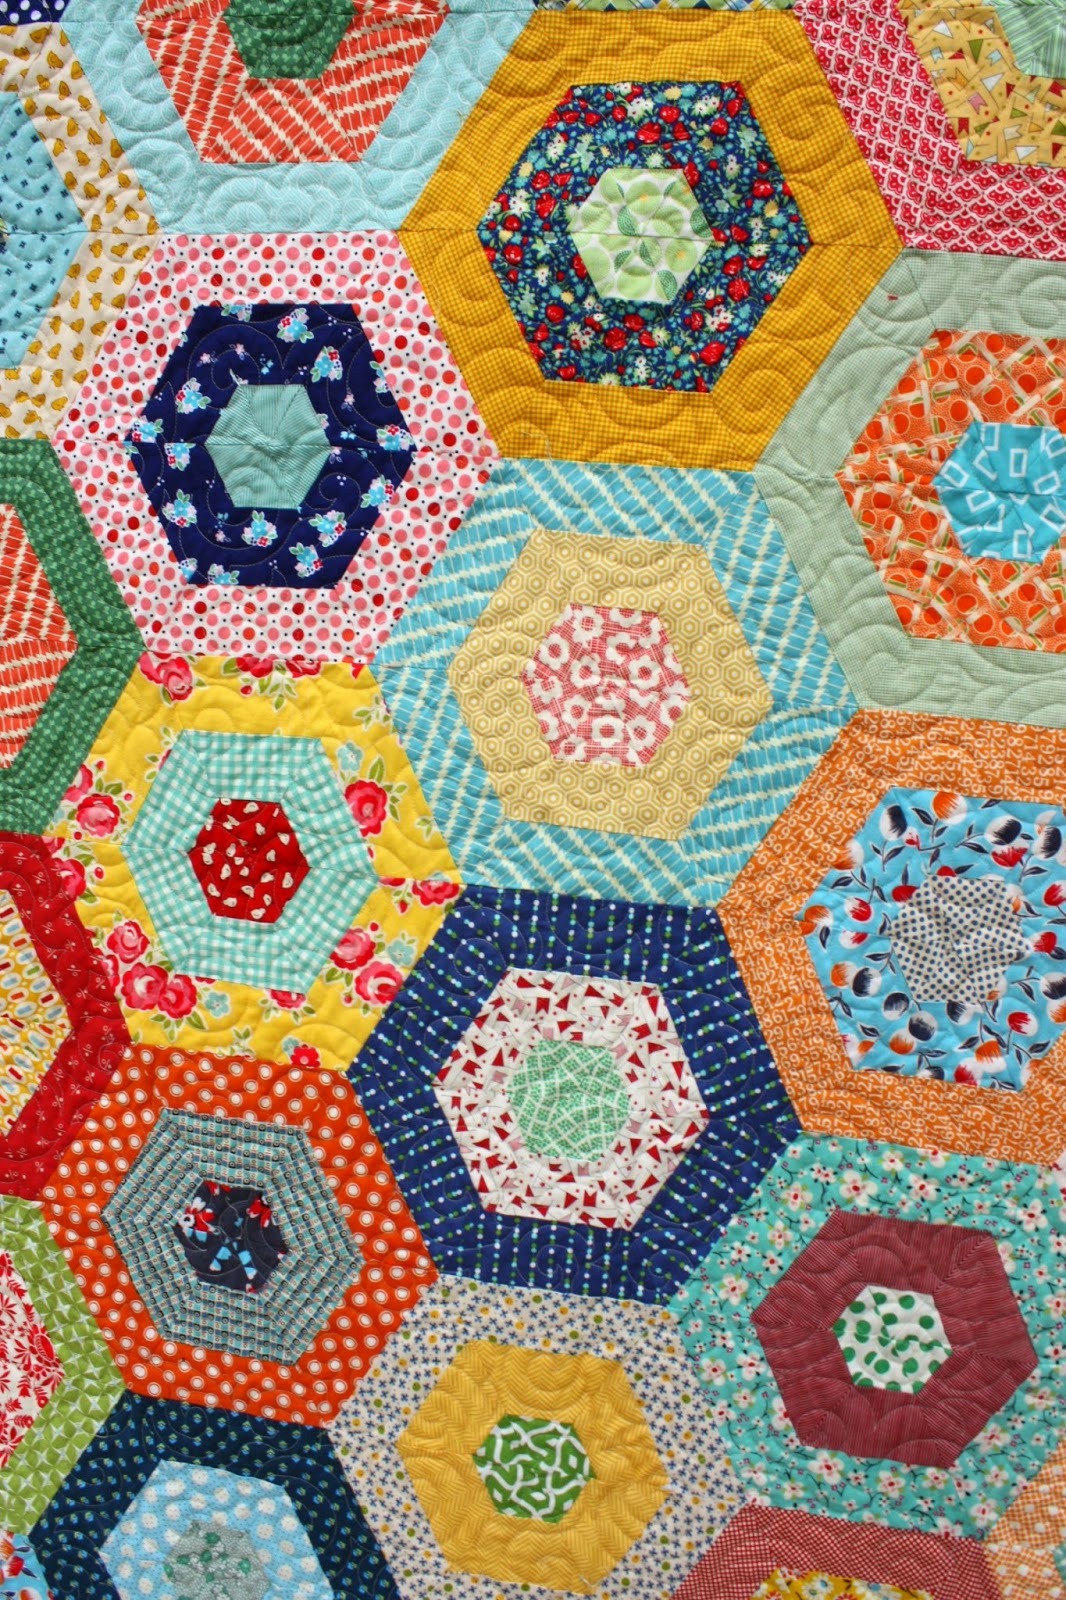 scrappy-giant-hexagon-quilt-diary-of-a-quilter-a-quilt-blog